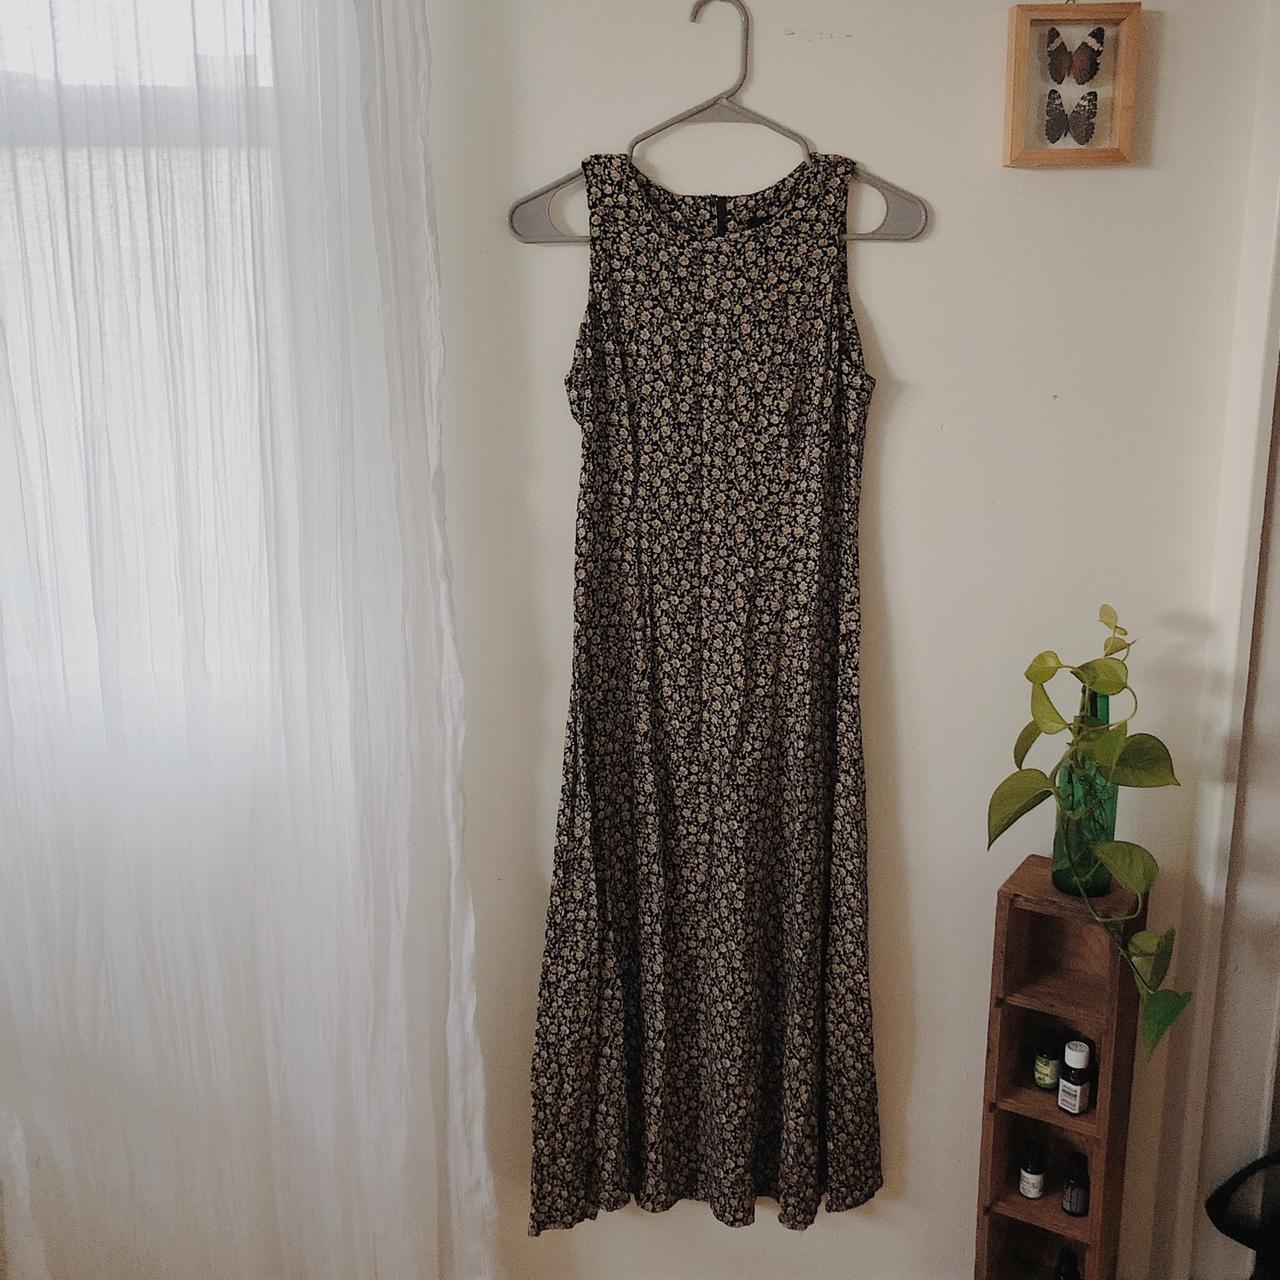 Connected Women's Black and Tan Dress